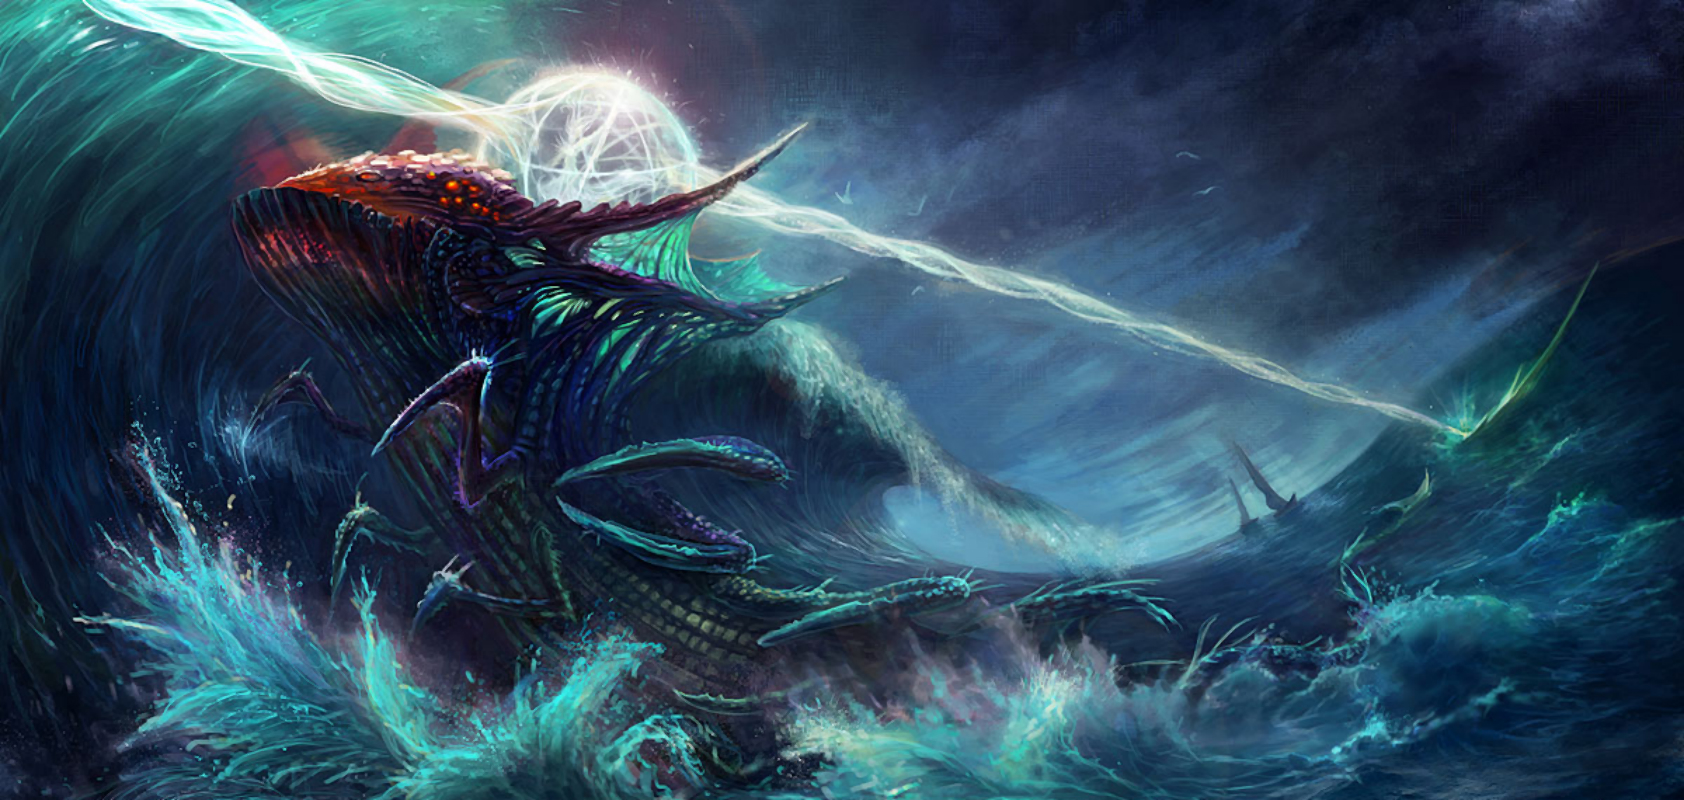 Fantasy sea monster emerges from the depths.